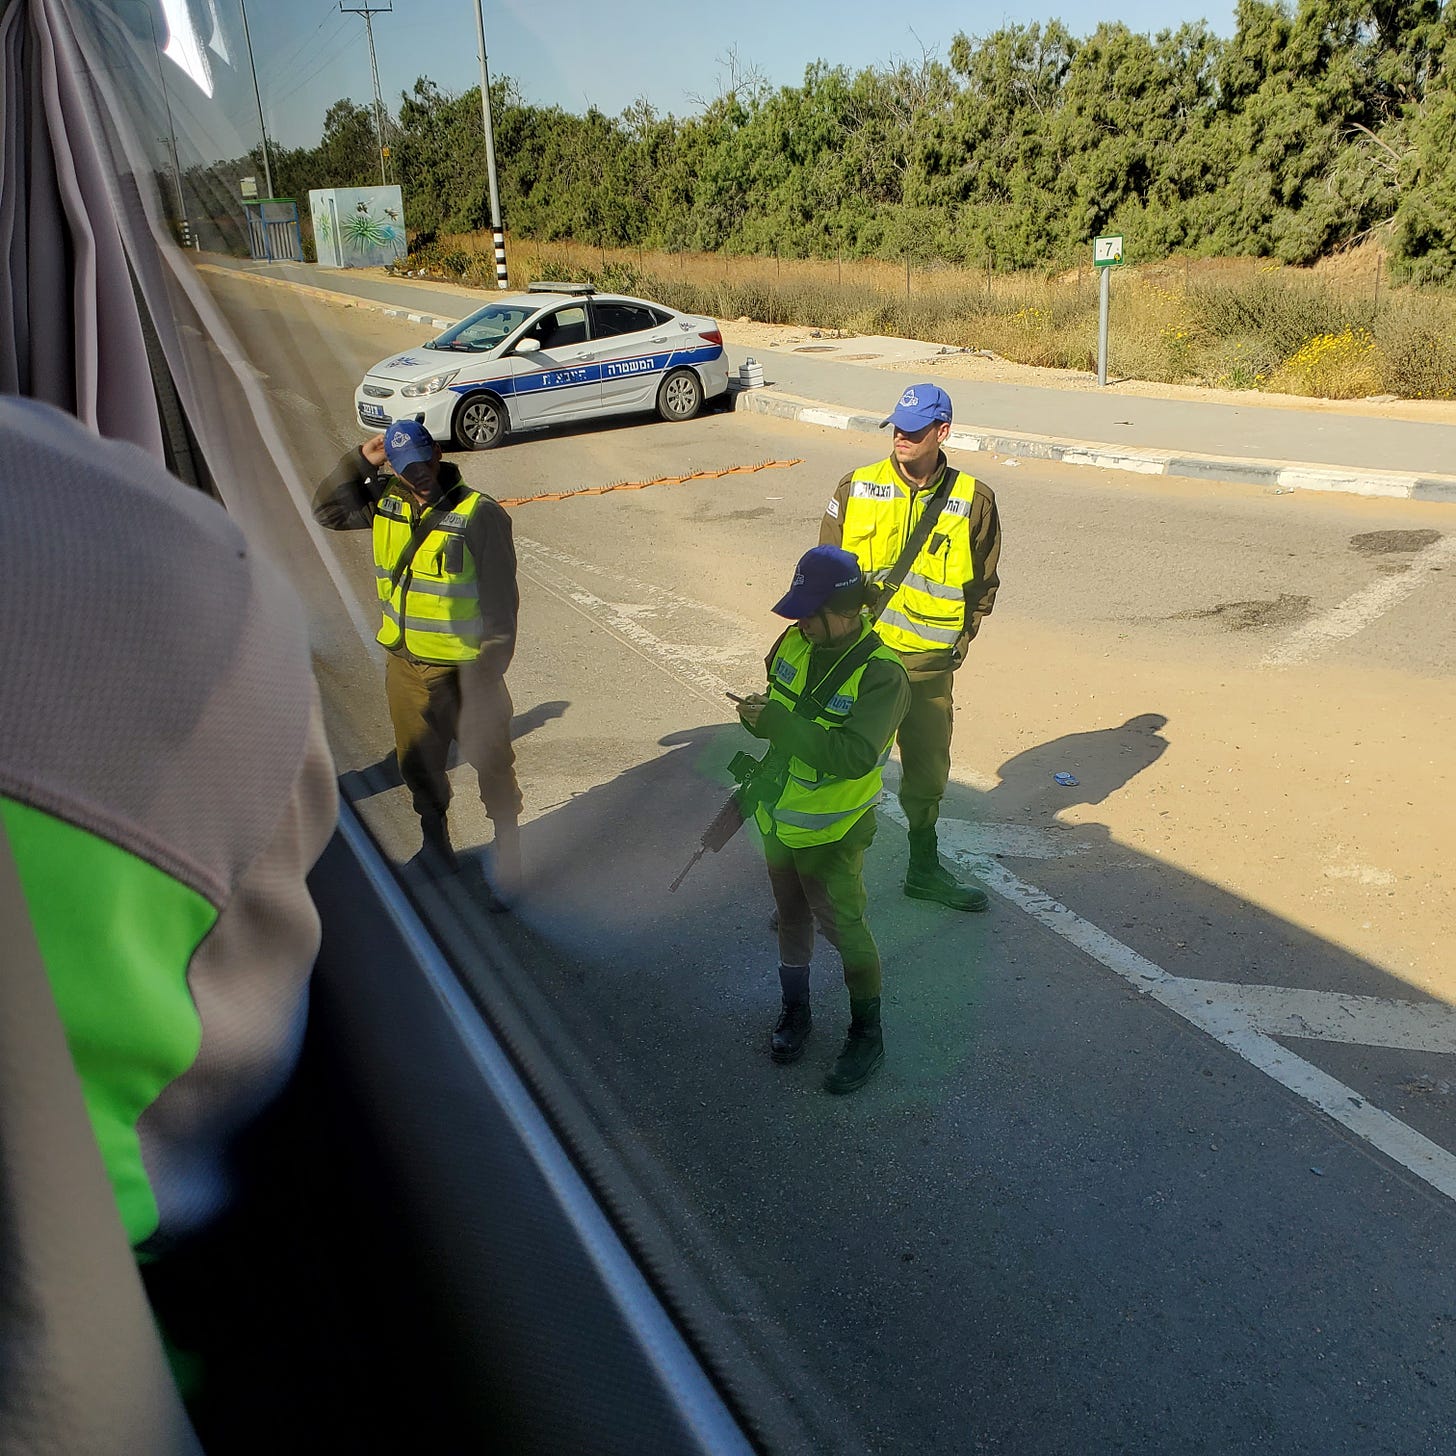 Three IDF soldiers in yellow bests and carrying assault rifles stand outside our bus.